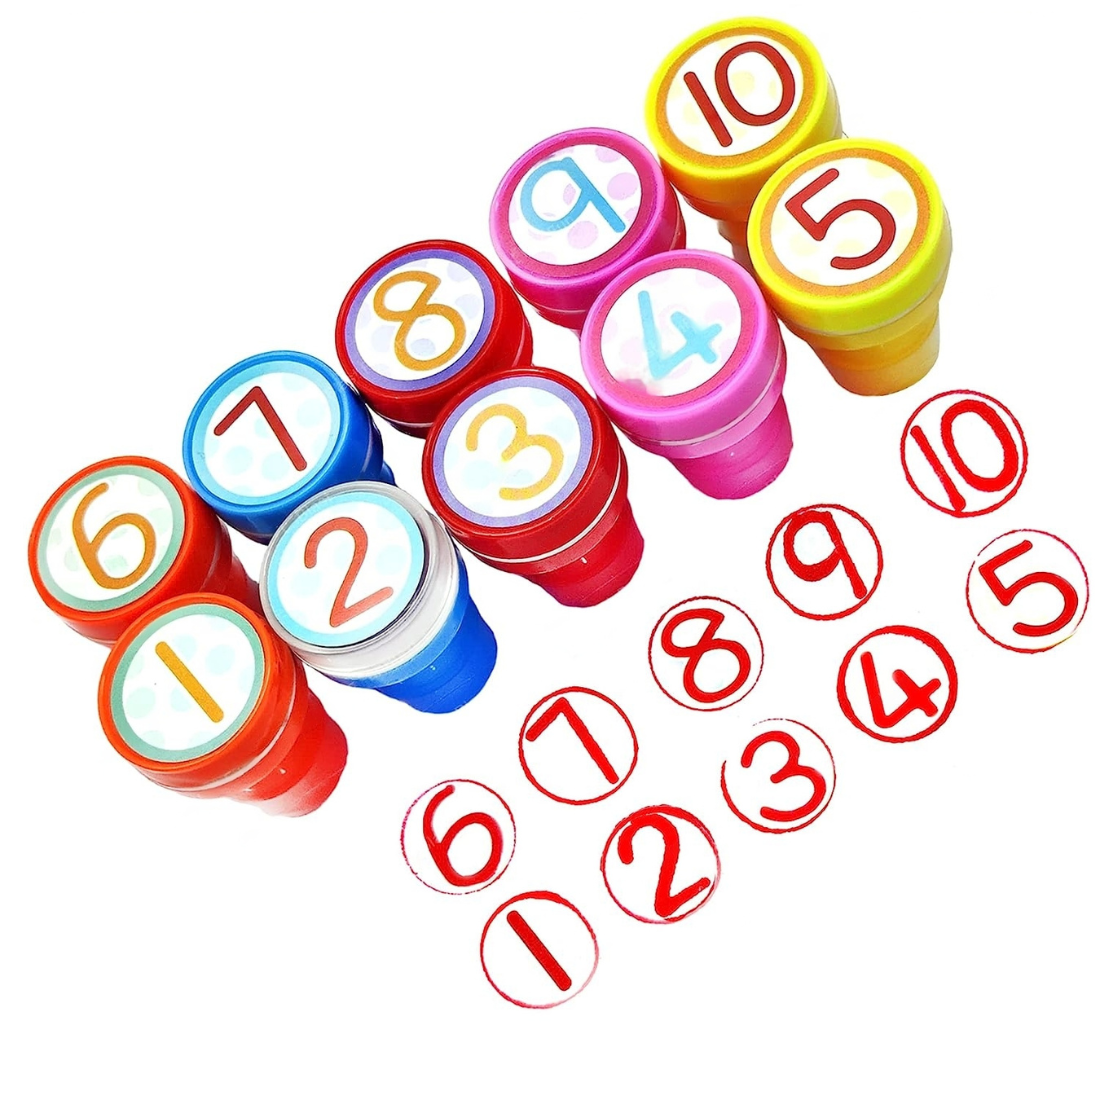 Oytra 10 Piece Number Stamps for Kids, Students Birthday Gift Art and Craft Stamps Learing toy for Kids, Girls, Boys